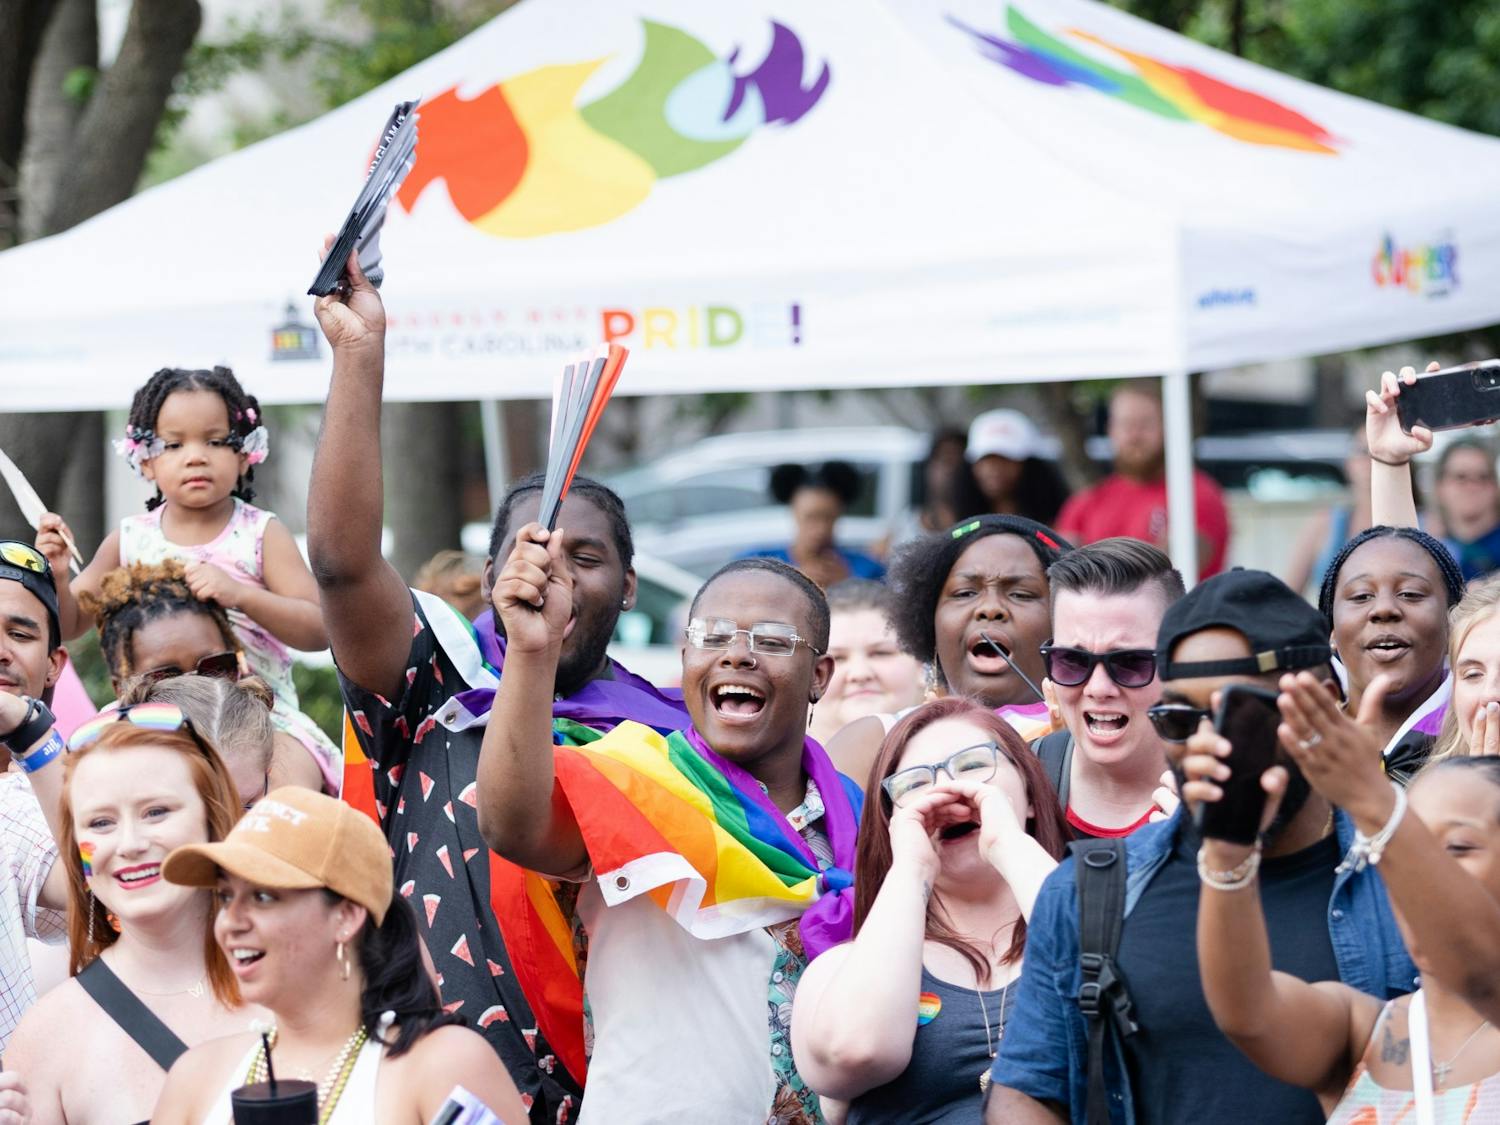 The crowd cheers as Outfest attendees enter a spontaneous dance circle on Park Street on June 4, 2022. Outfest featured performances, food and vendors in honor of Pride month.